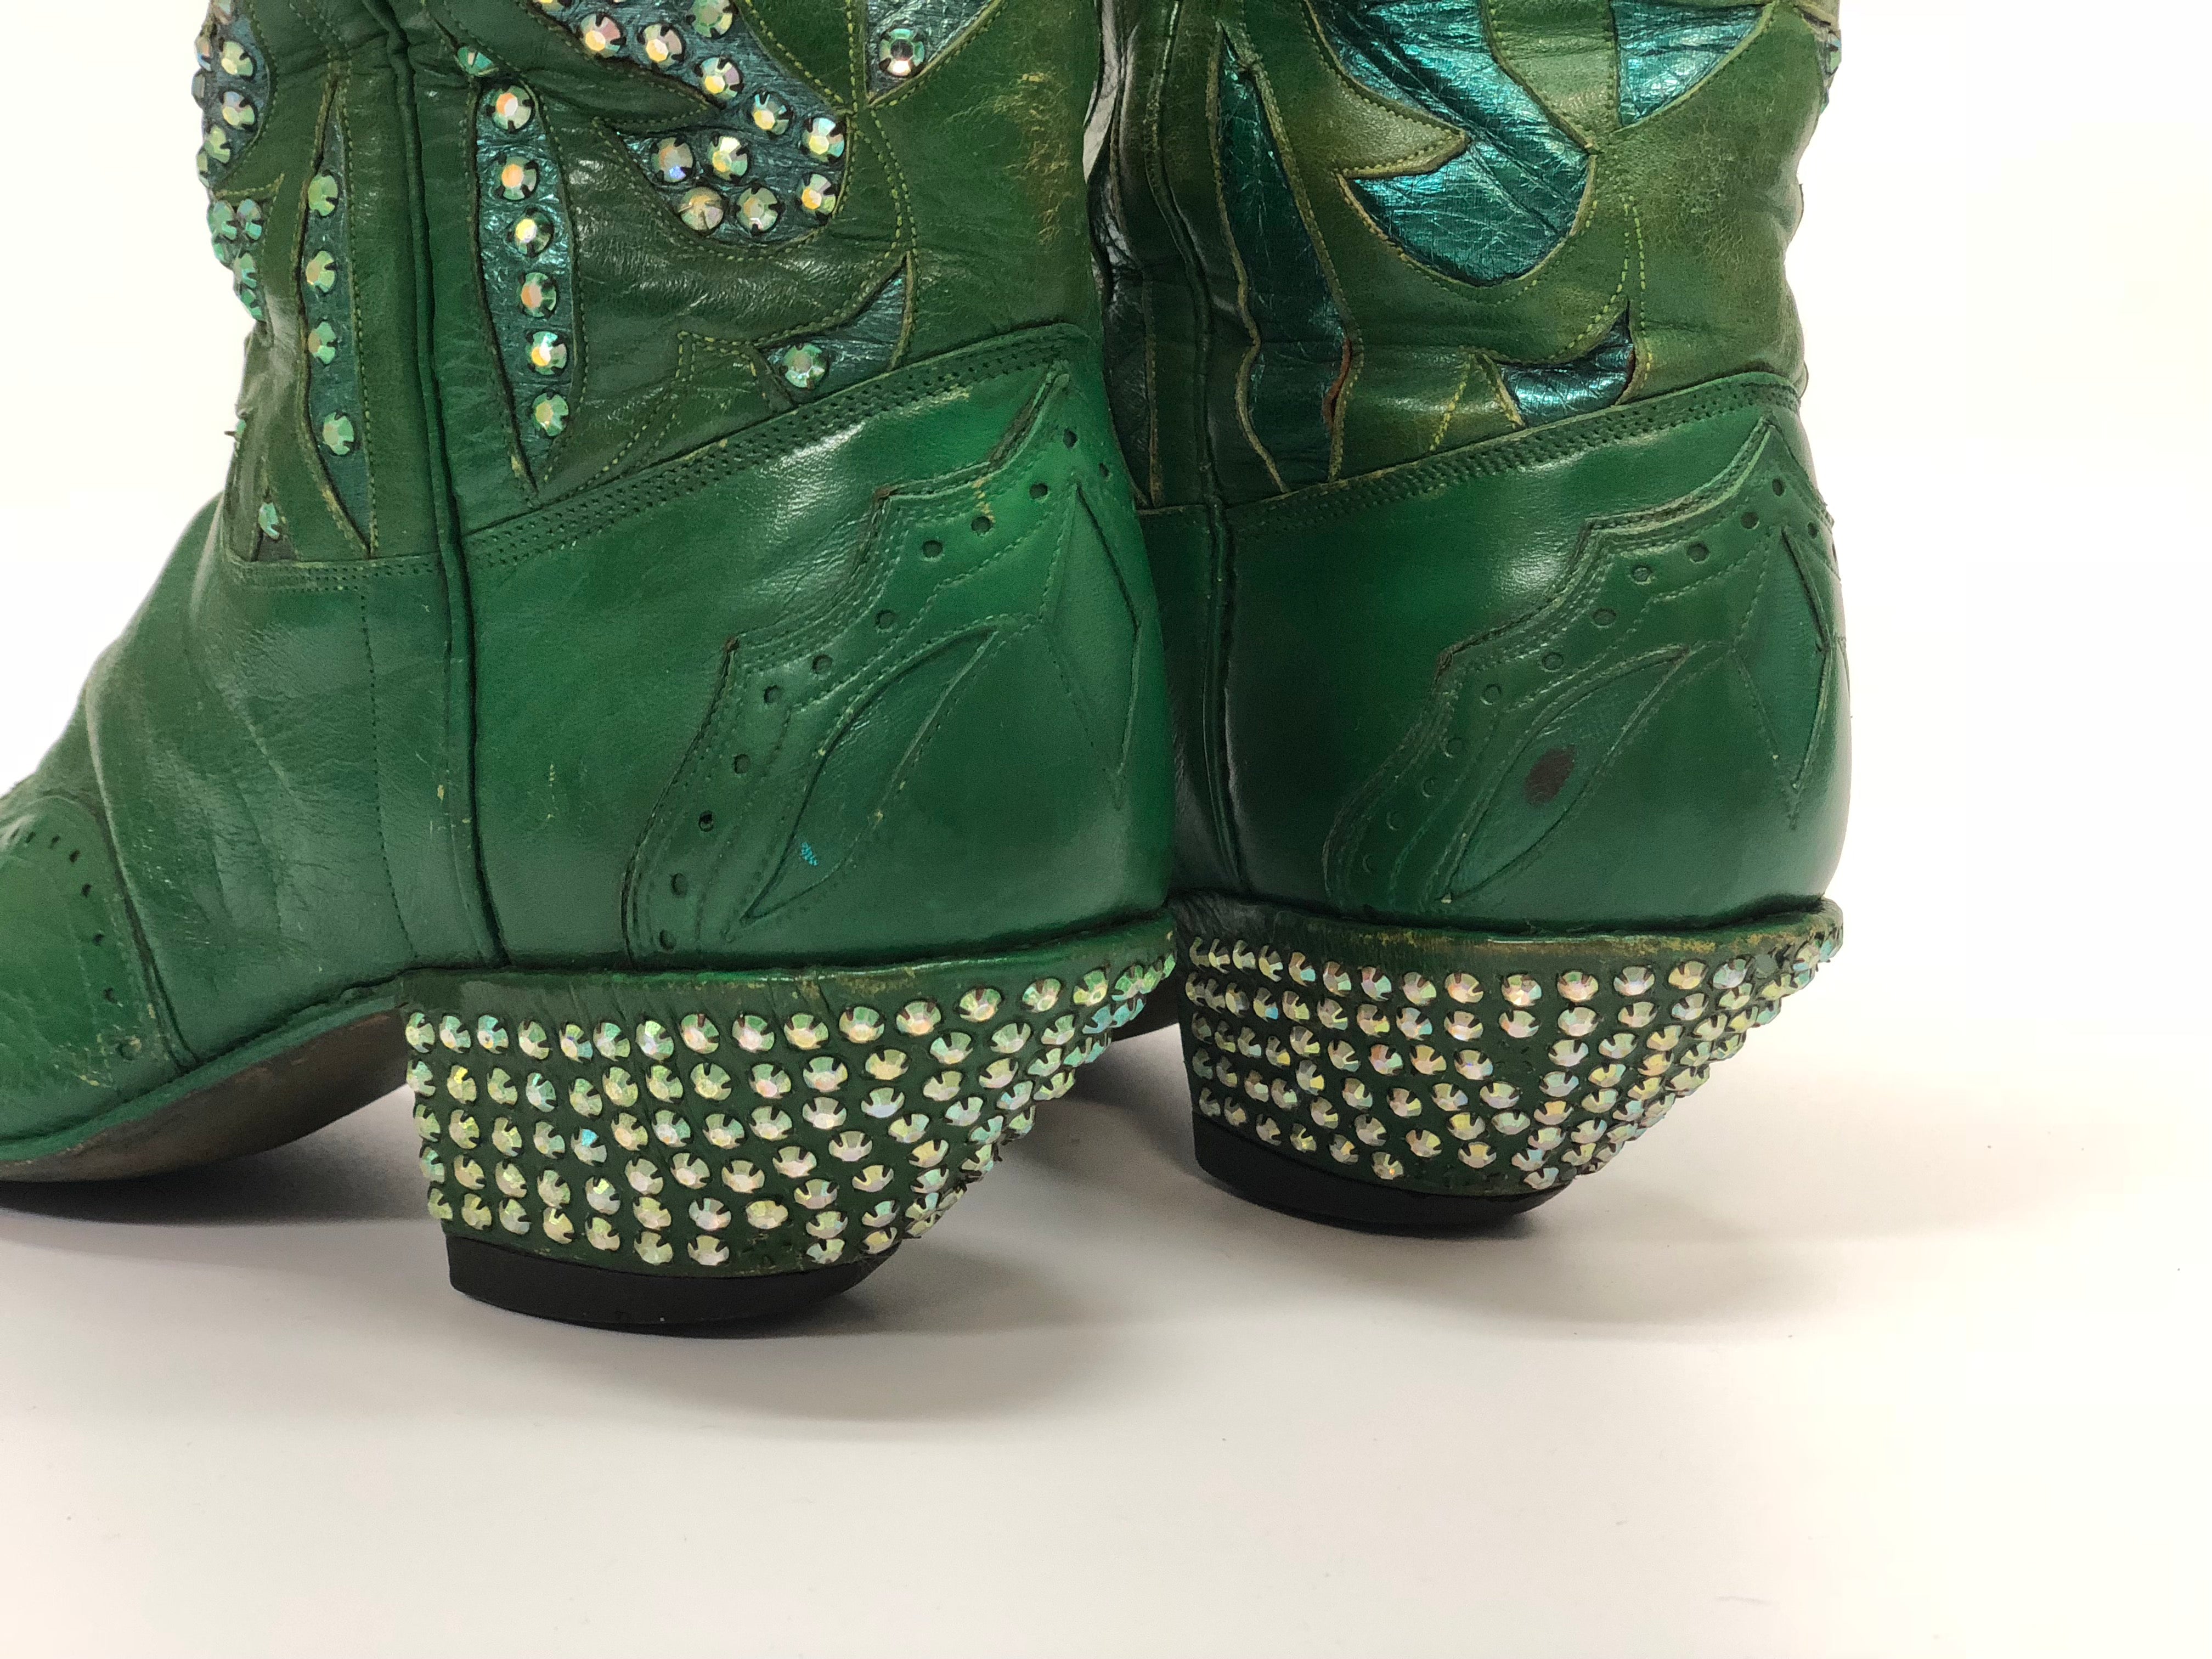 Nudie’s Rodeo Tailor Rhinestone Cowboy Boots